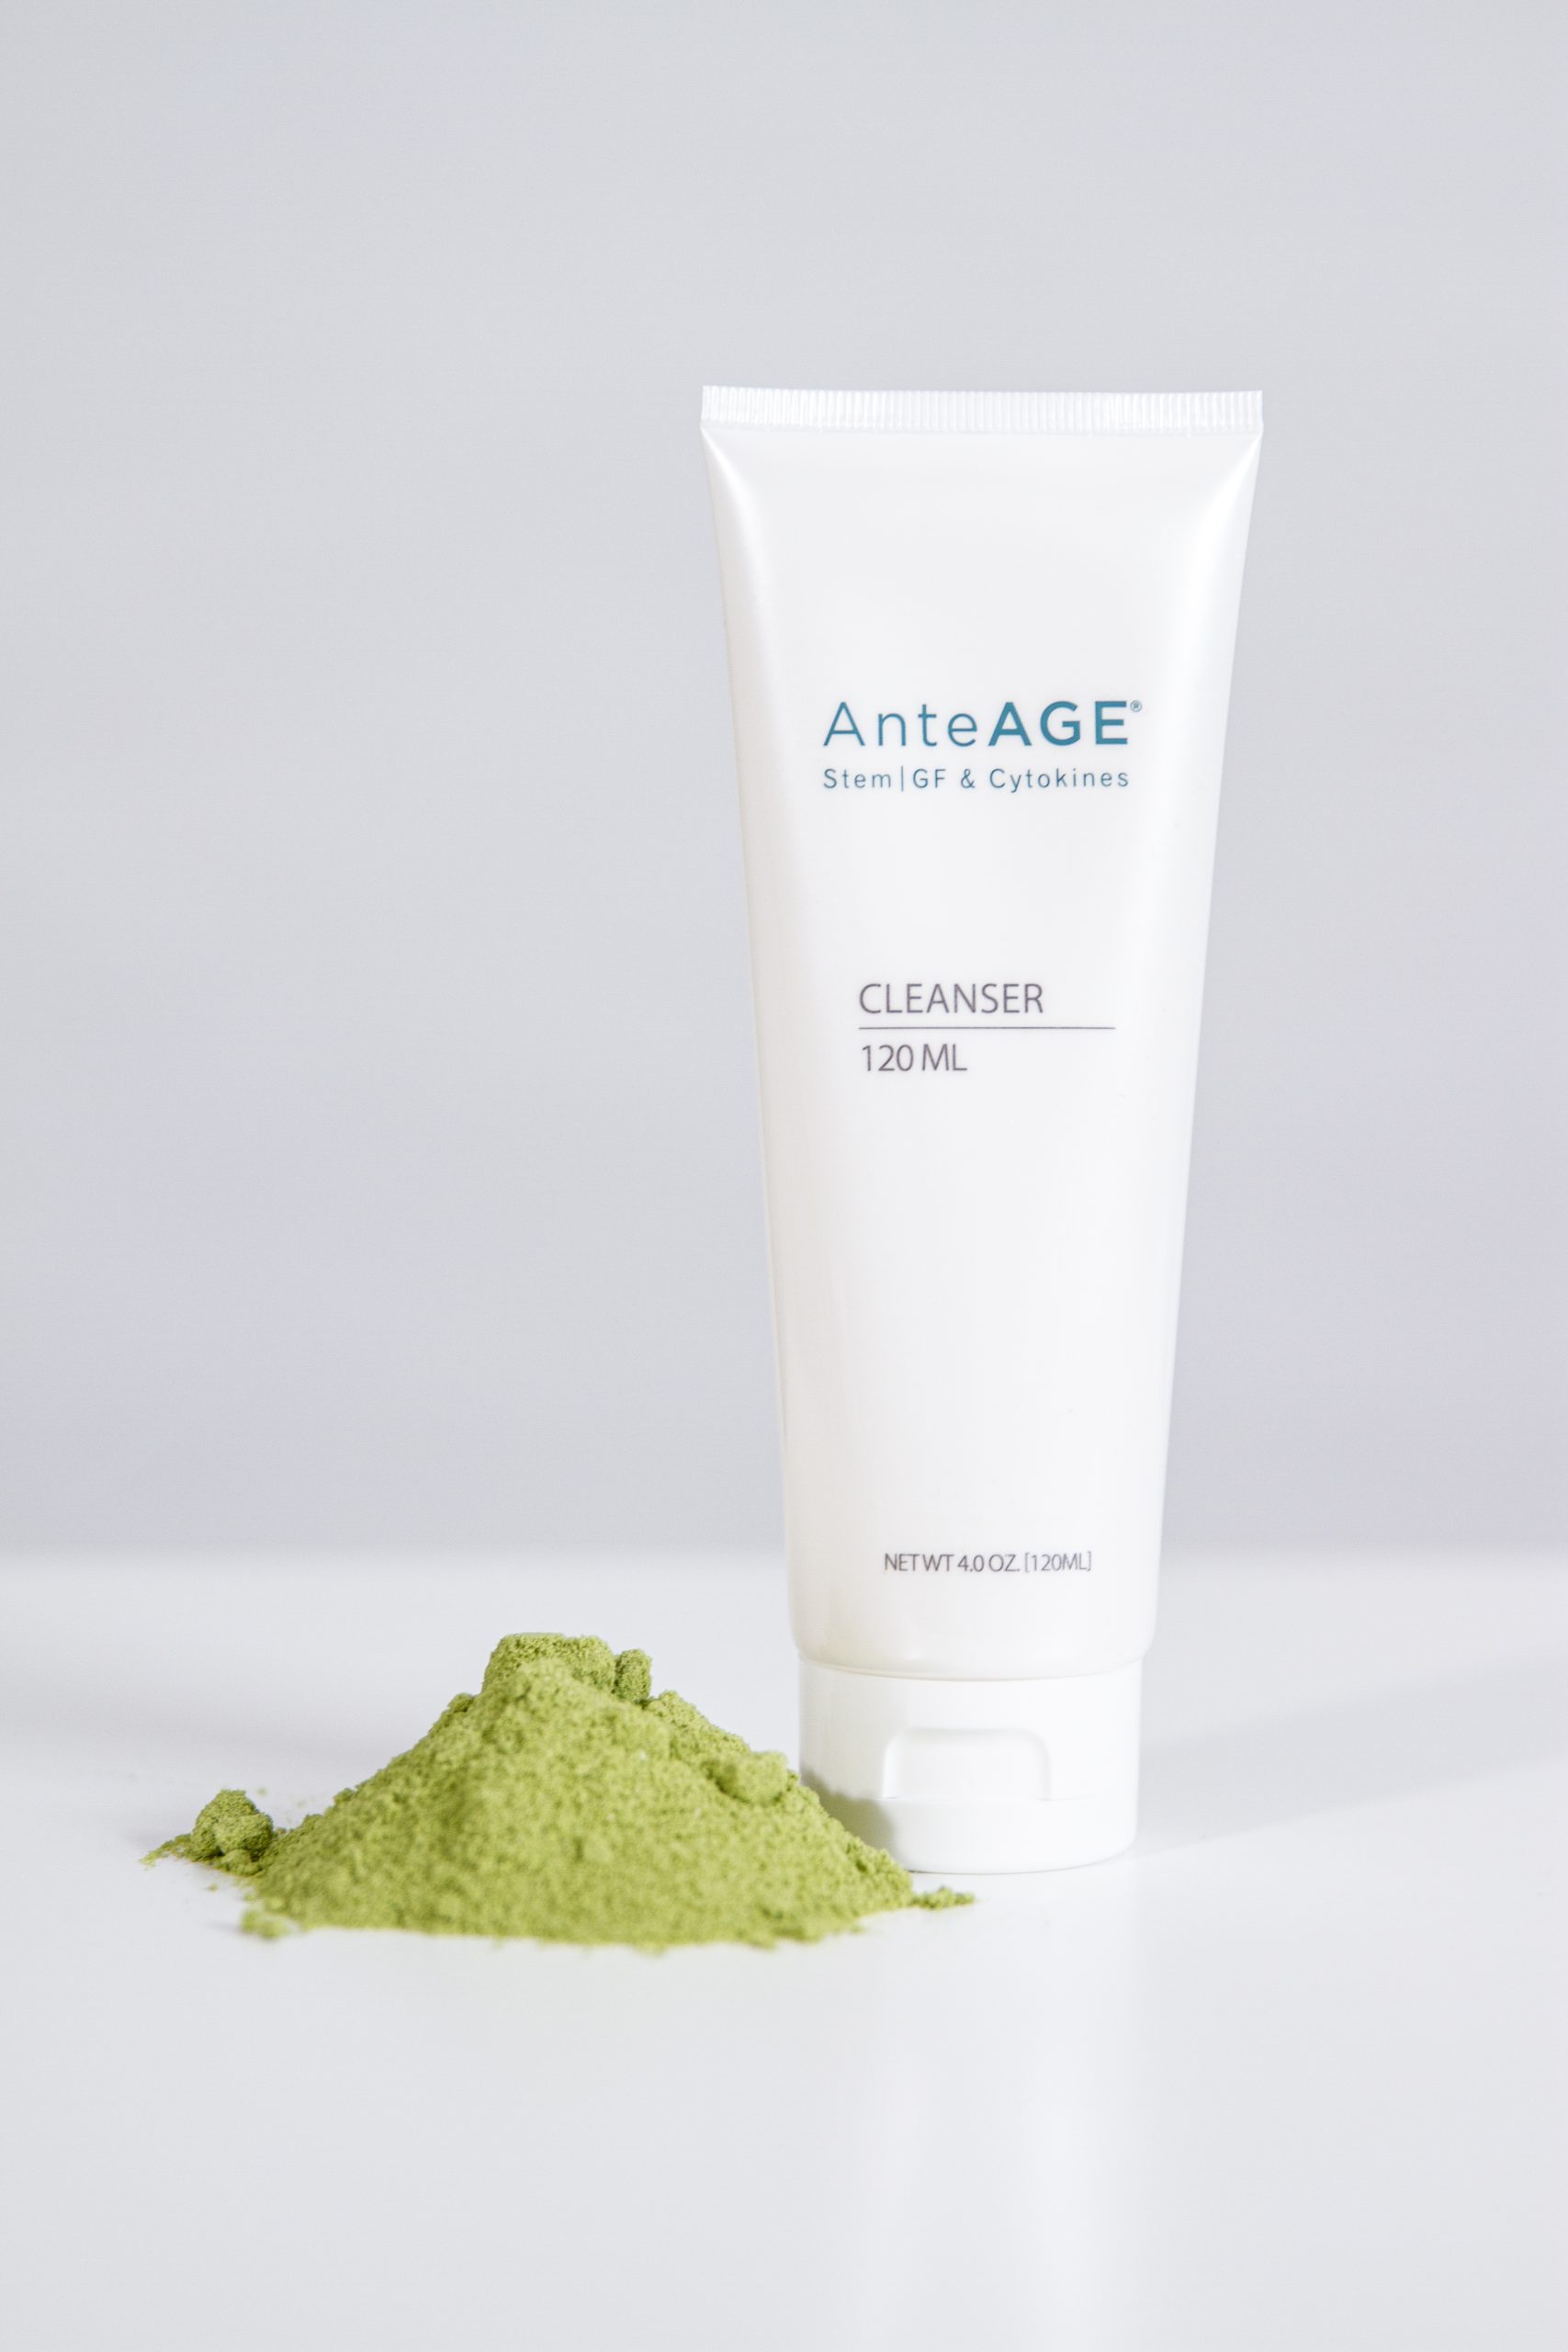 A tube of antiage cleanser powder next to a bowl of green powder at a Medical Center.